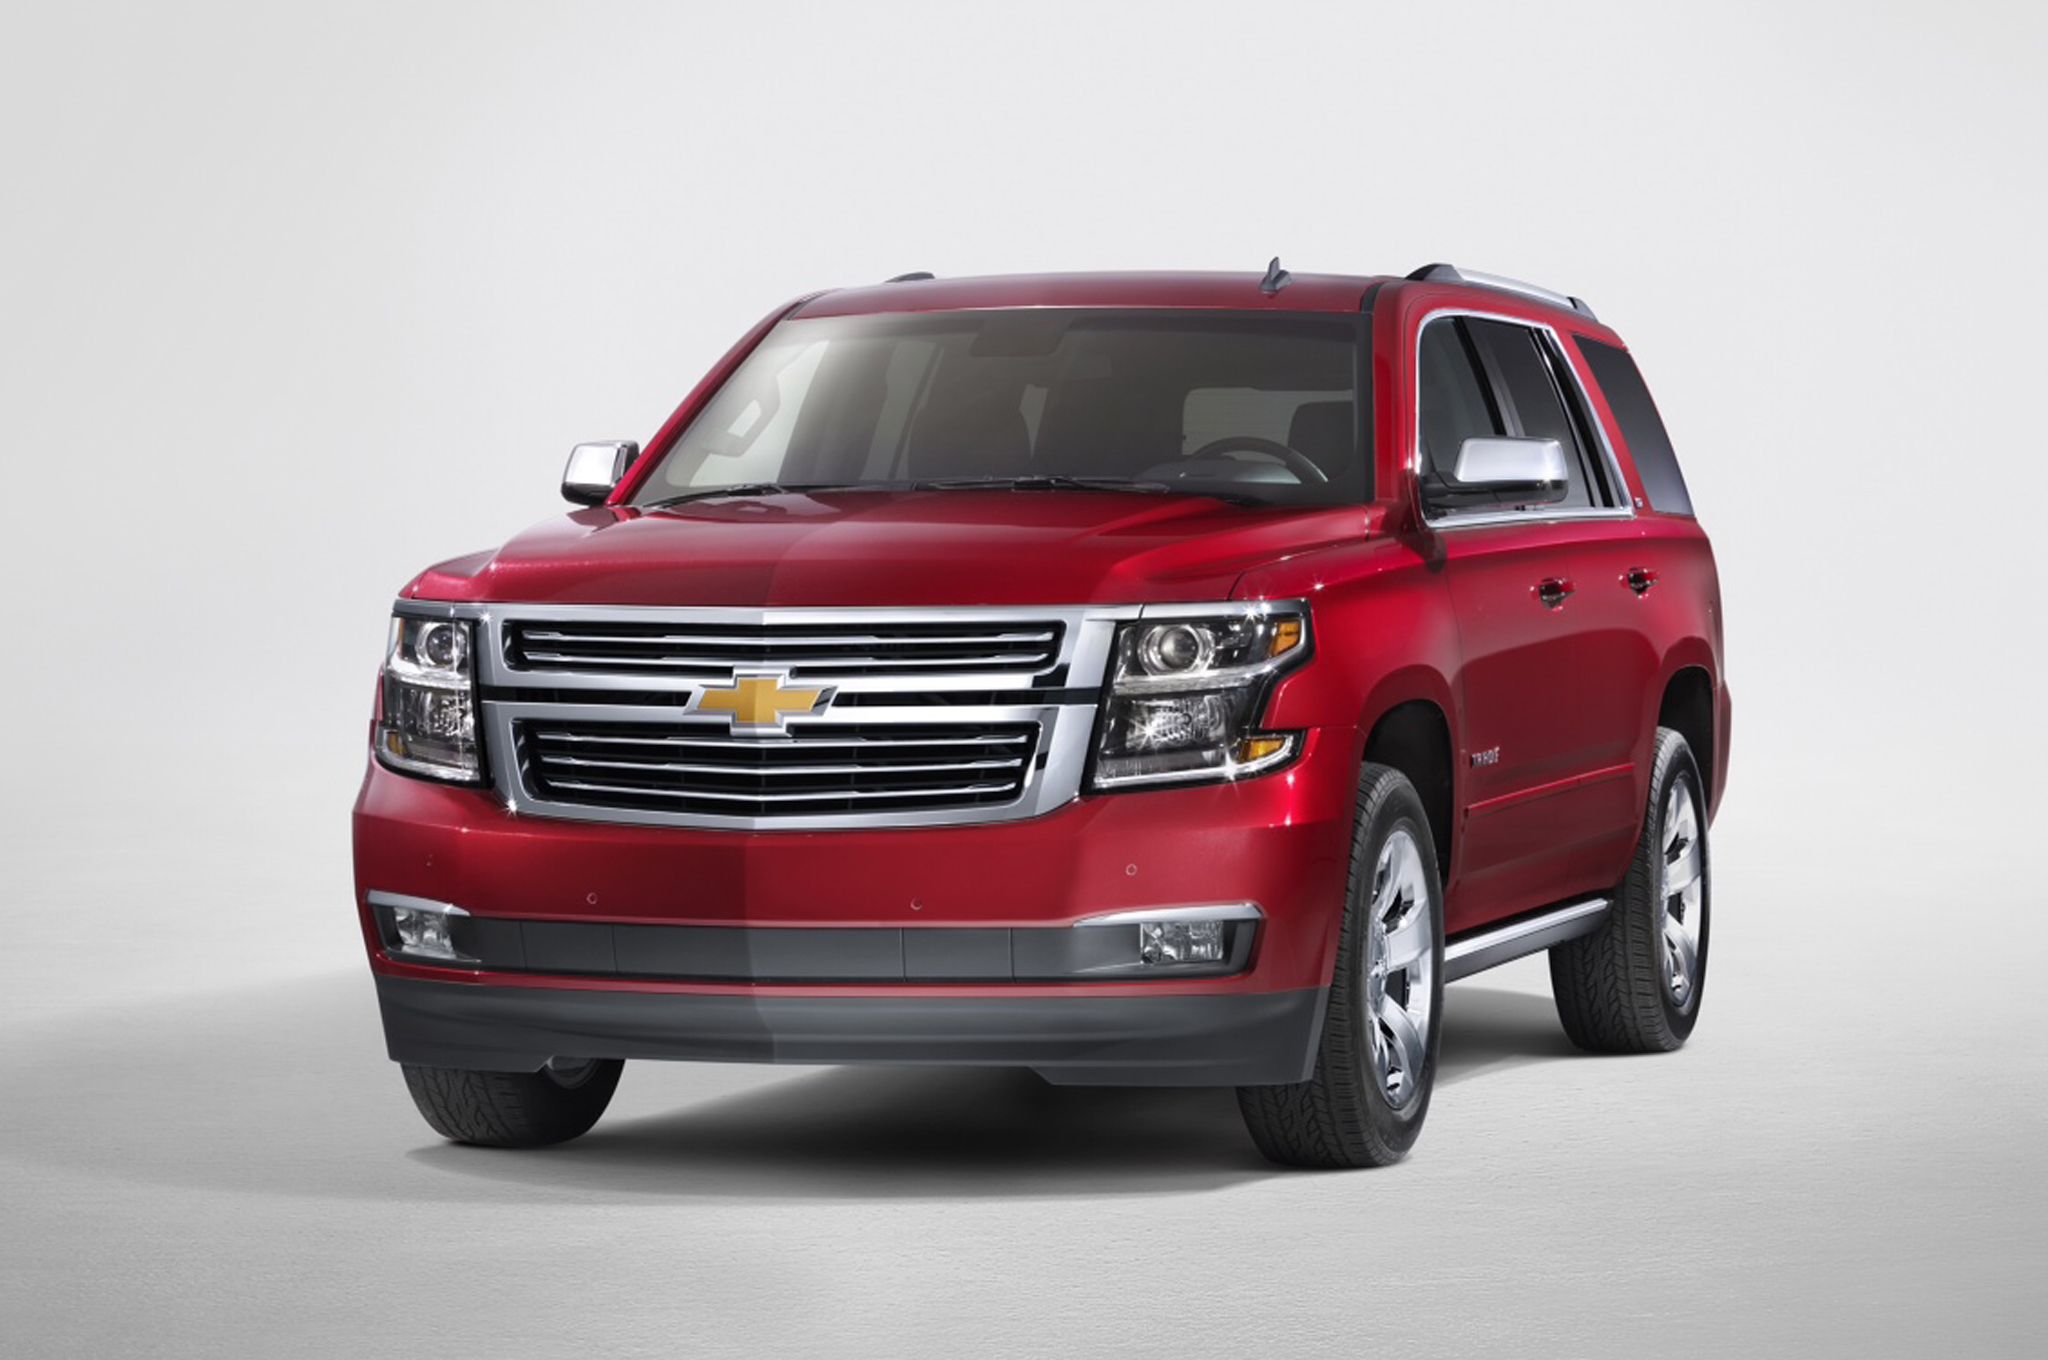 2015 Chevrolet Tahoe Front End (View 5 of 5)